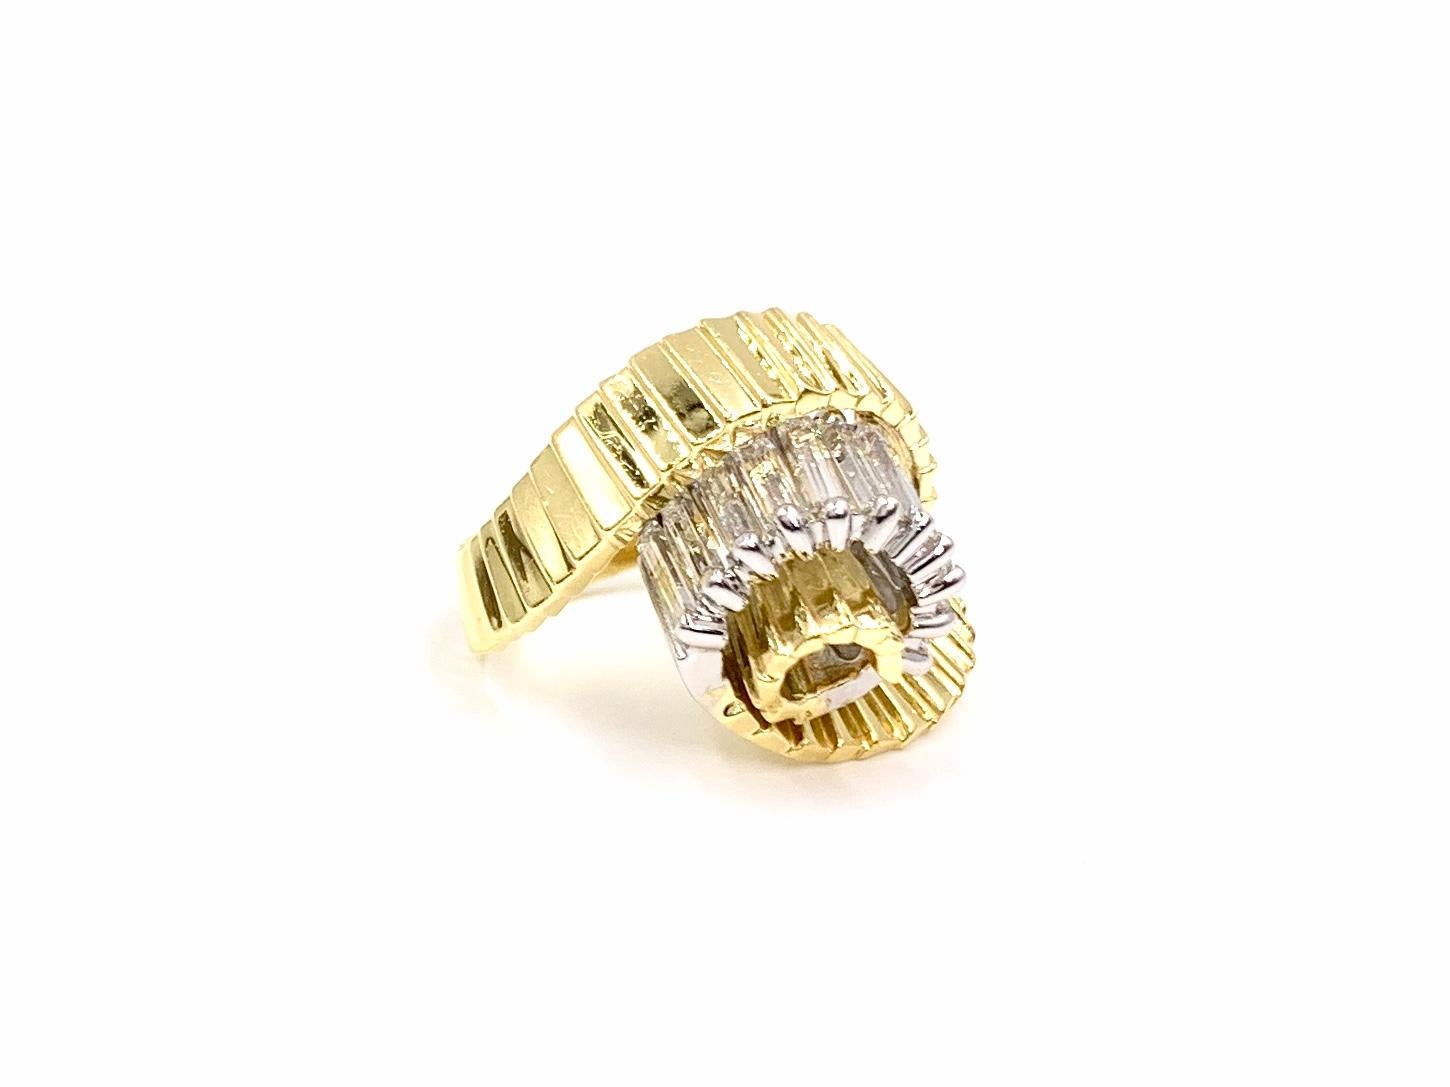 Made with superior quality by Jose Hess in 18 karat yellow and white gold. This uniquely designed modern swirl ring features 2.10 carats of high quality baguette cut diamonds, perfectly prong set in white gold for an extra bright look. Diamonds are